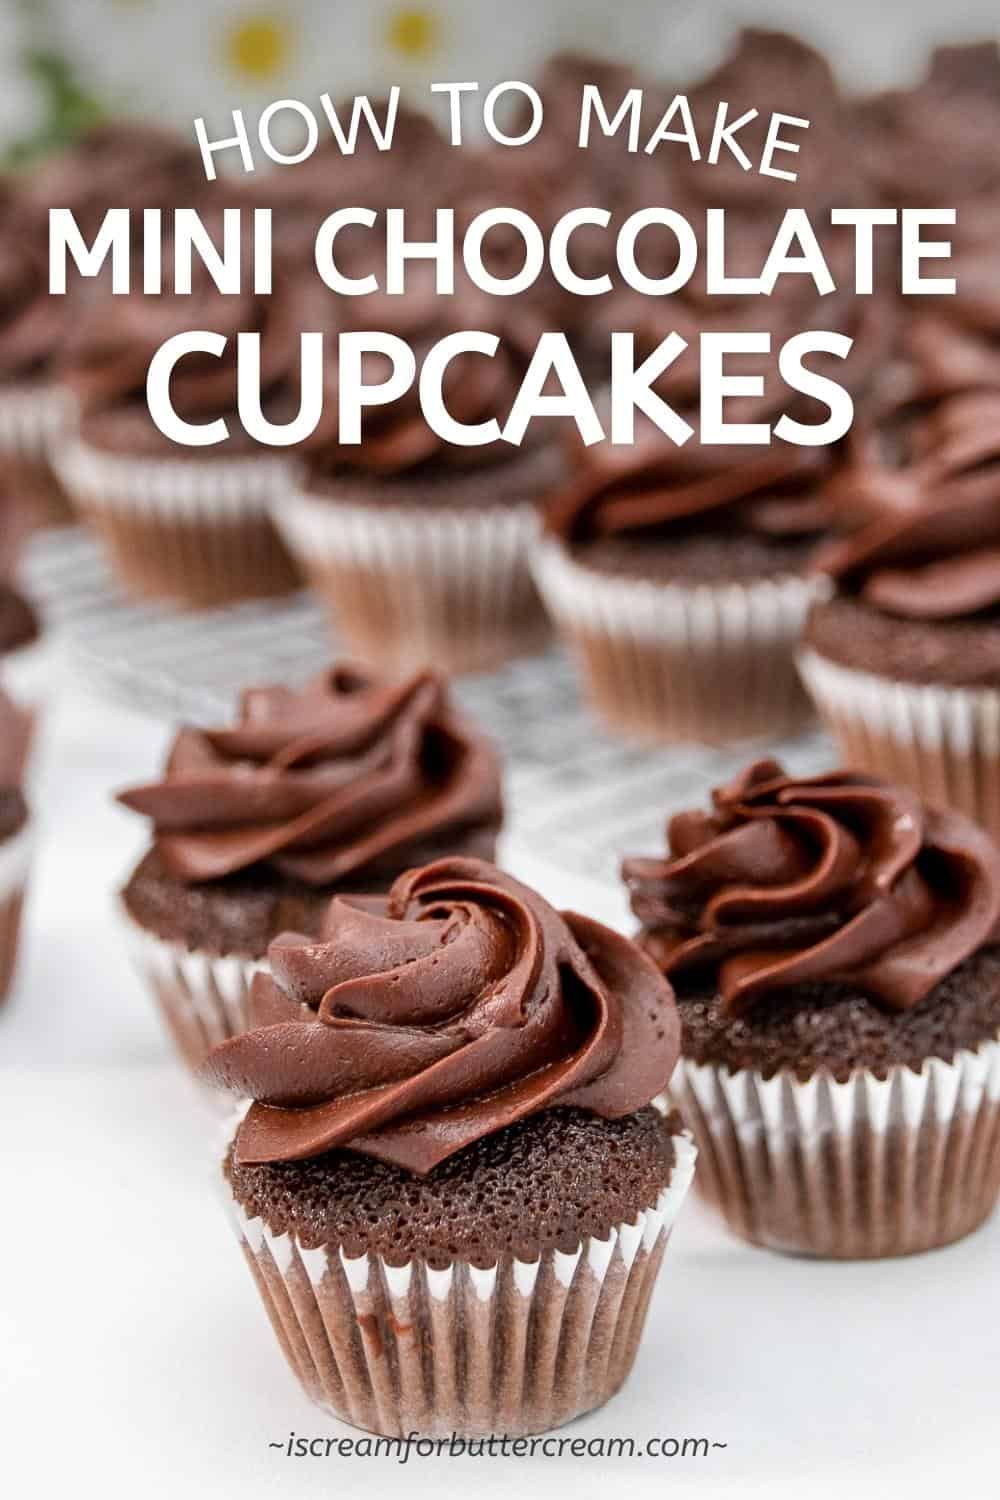 Pin image with close up of one mini cupcake.